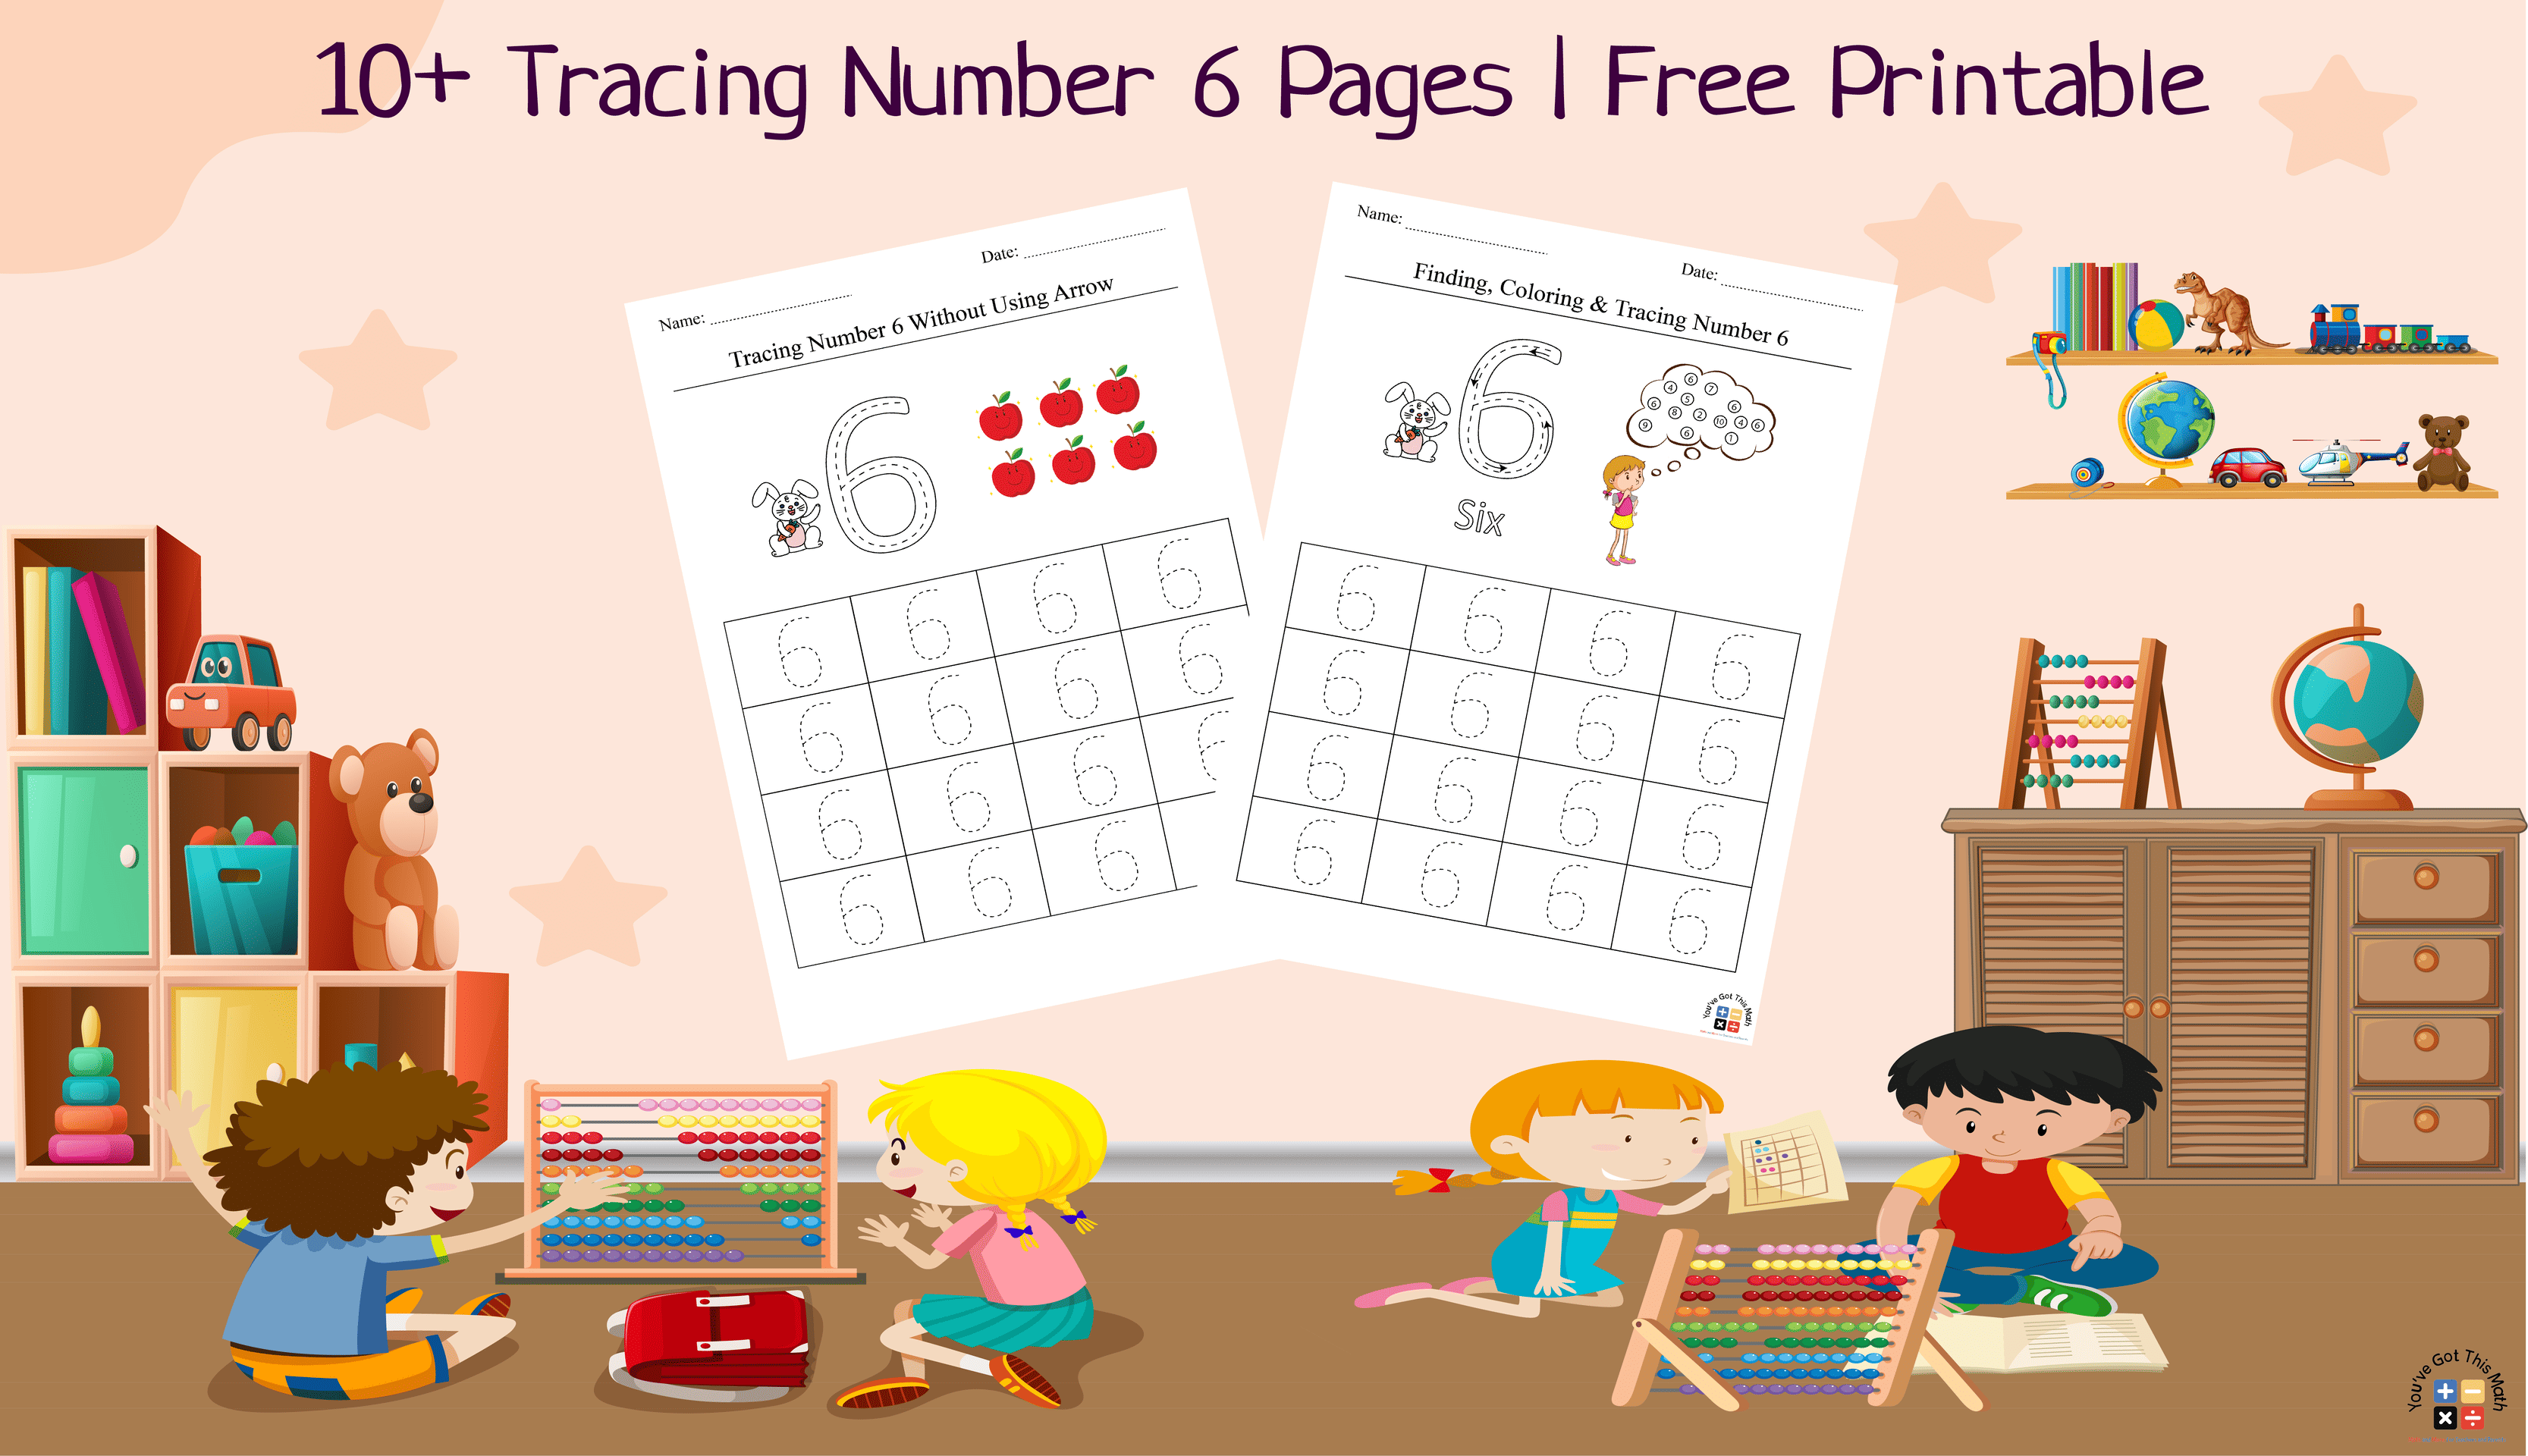 10+ Tracing Number 6 Pages | Free Printable